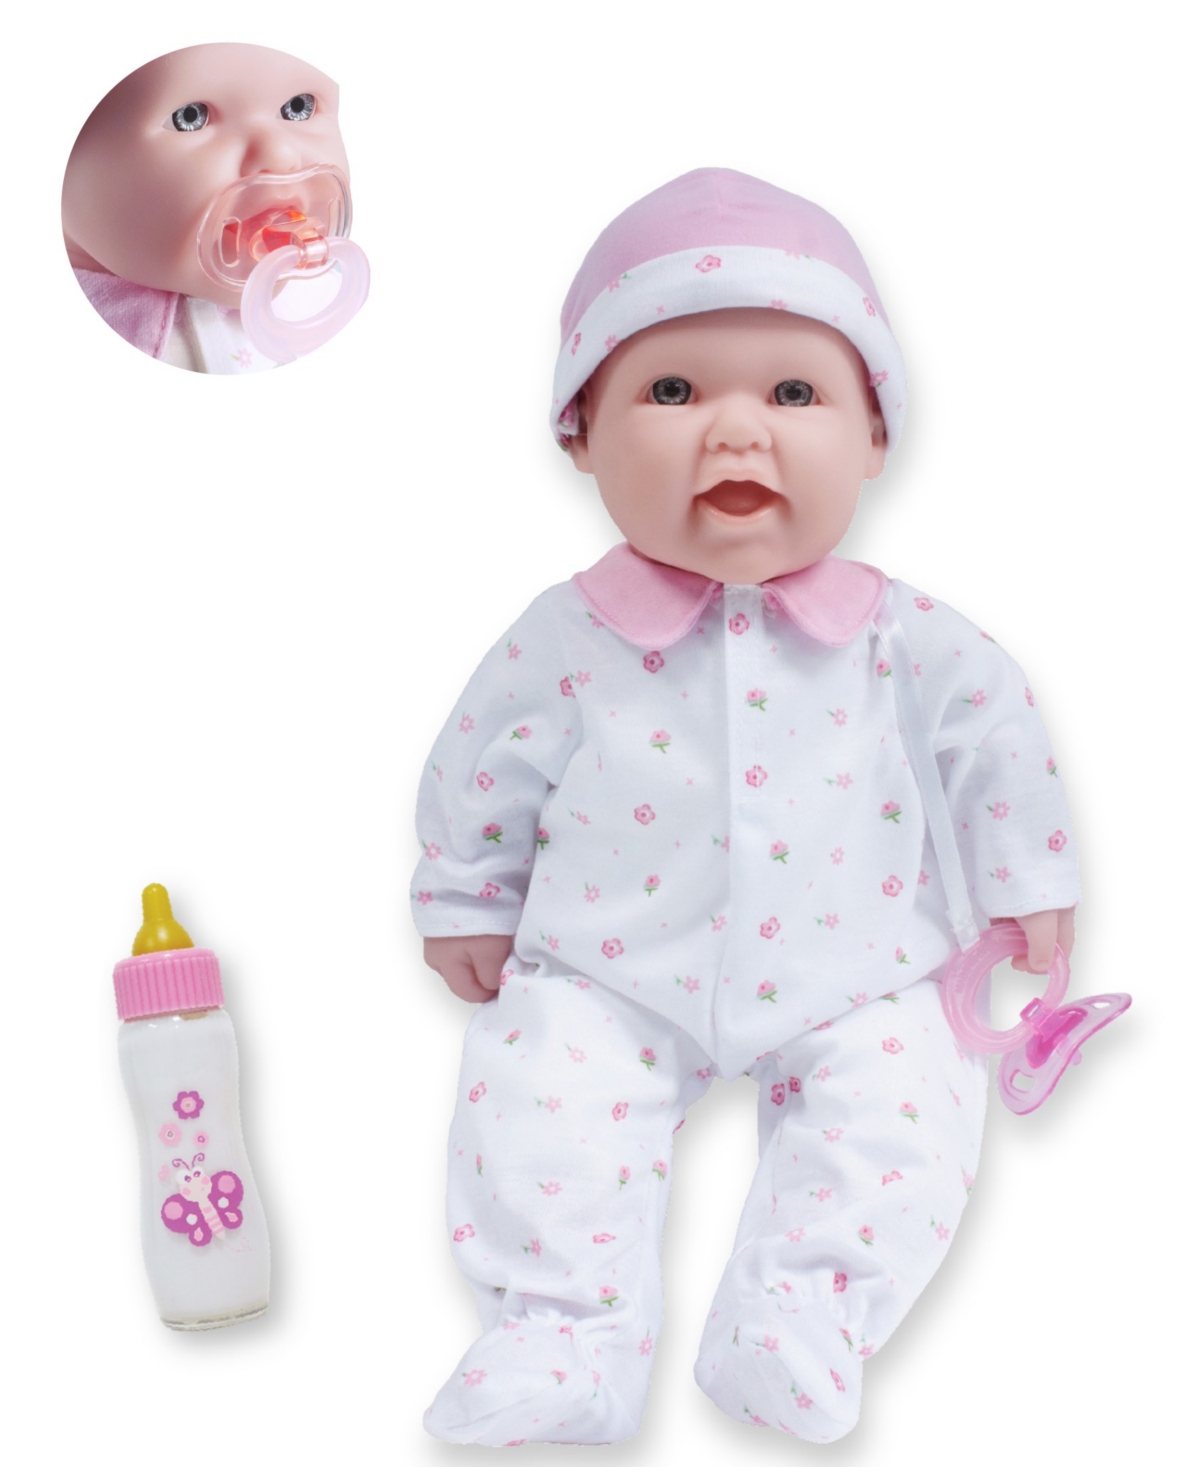 Jc Toys La Baby Caucasian 16" Soft Body Baby Doll Pink Outfit